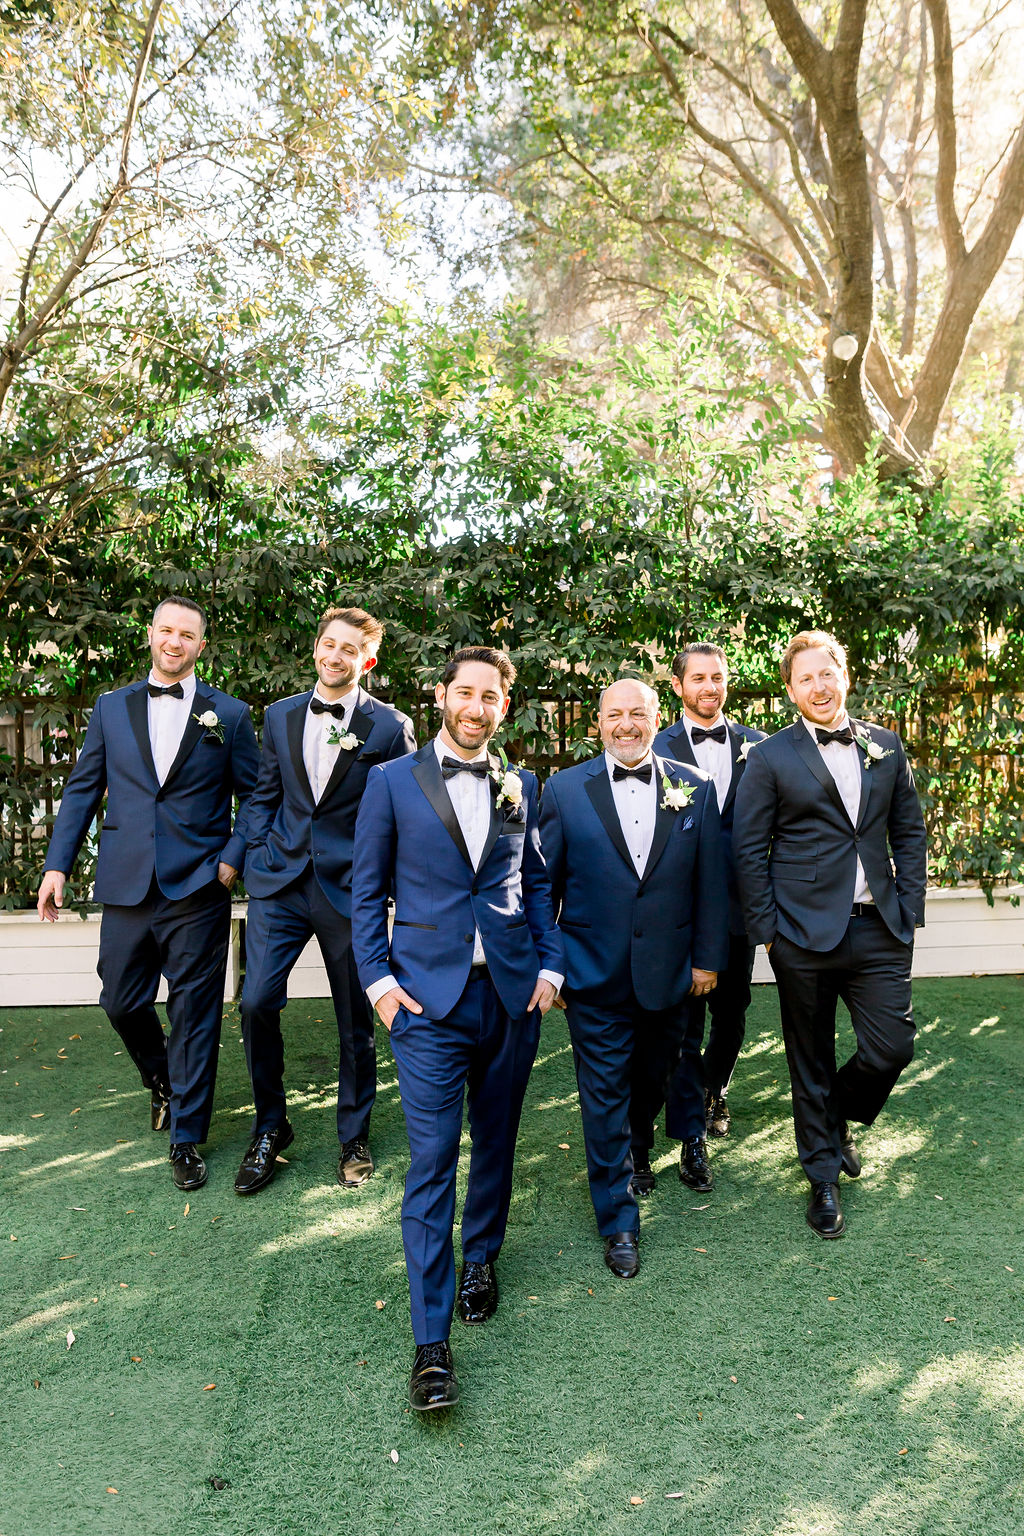 groom with paisley detail bowtie and blue tuxedo stands with groomsmen in blue tuxedo suits